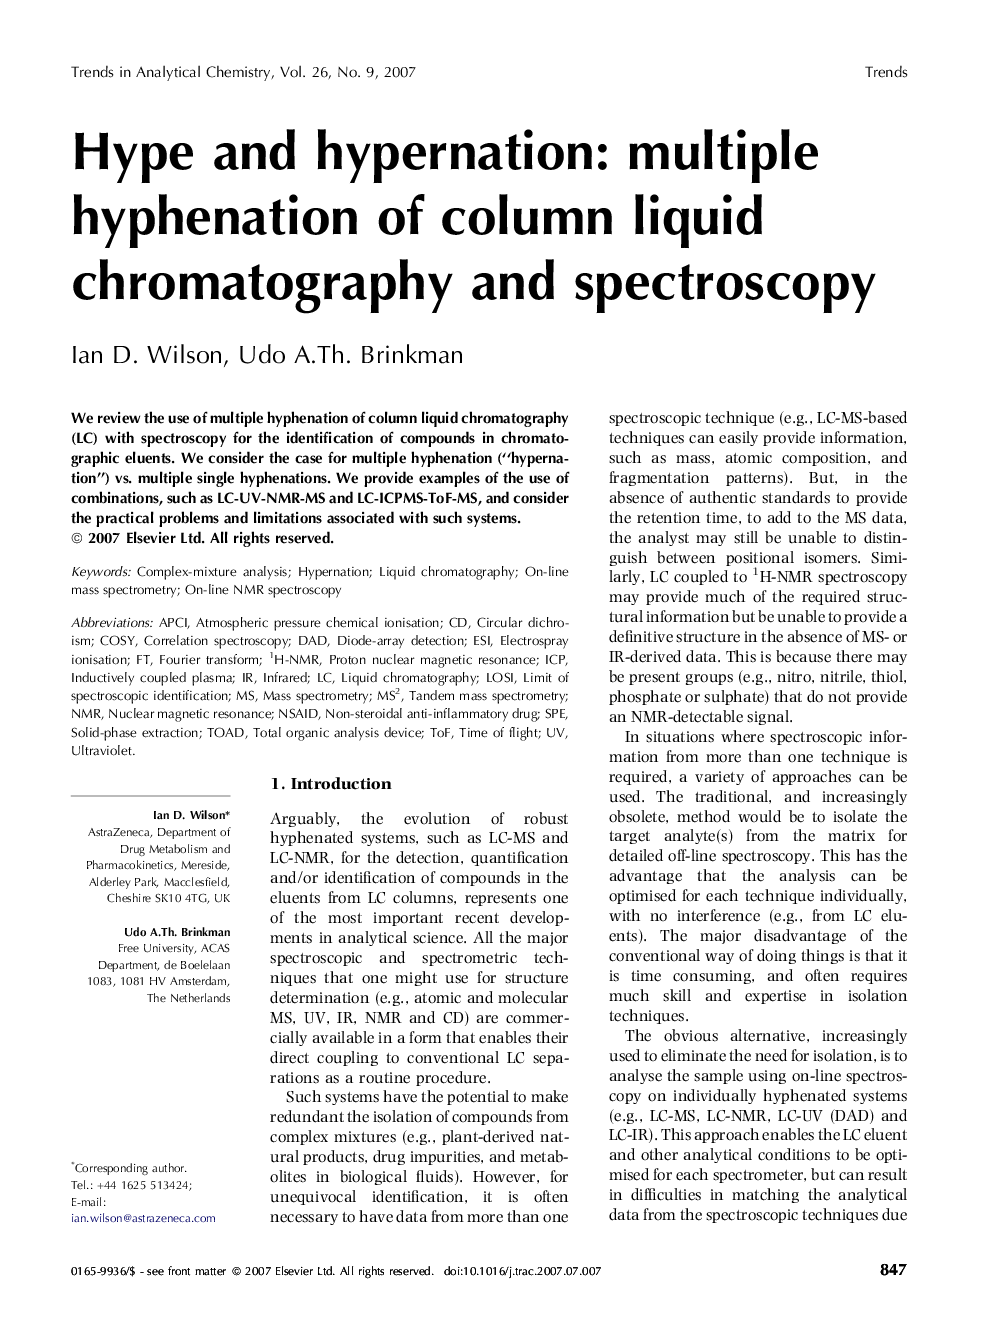 Hype and hypernation: multiple hyphenation of column liquid chromatography and spectroscopy